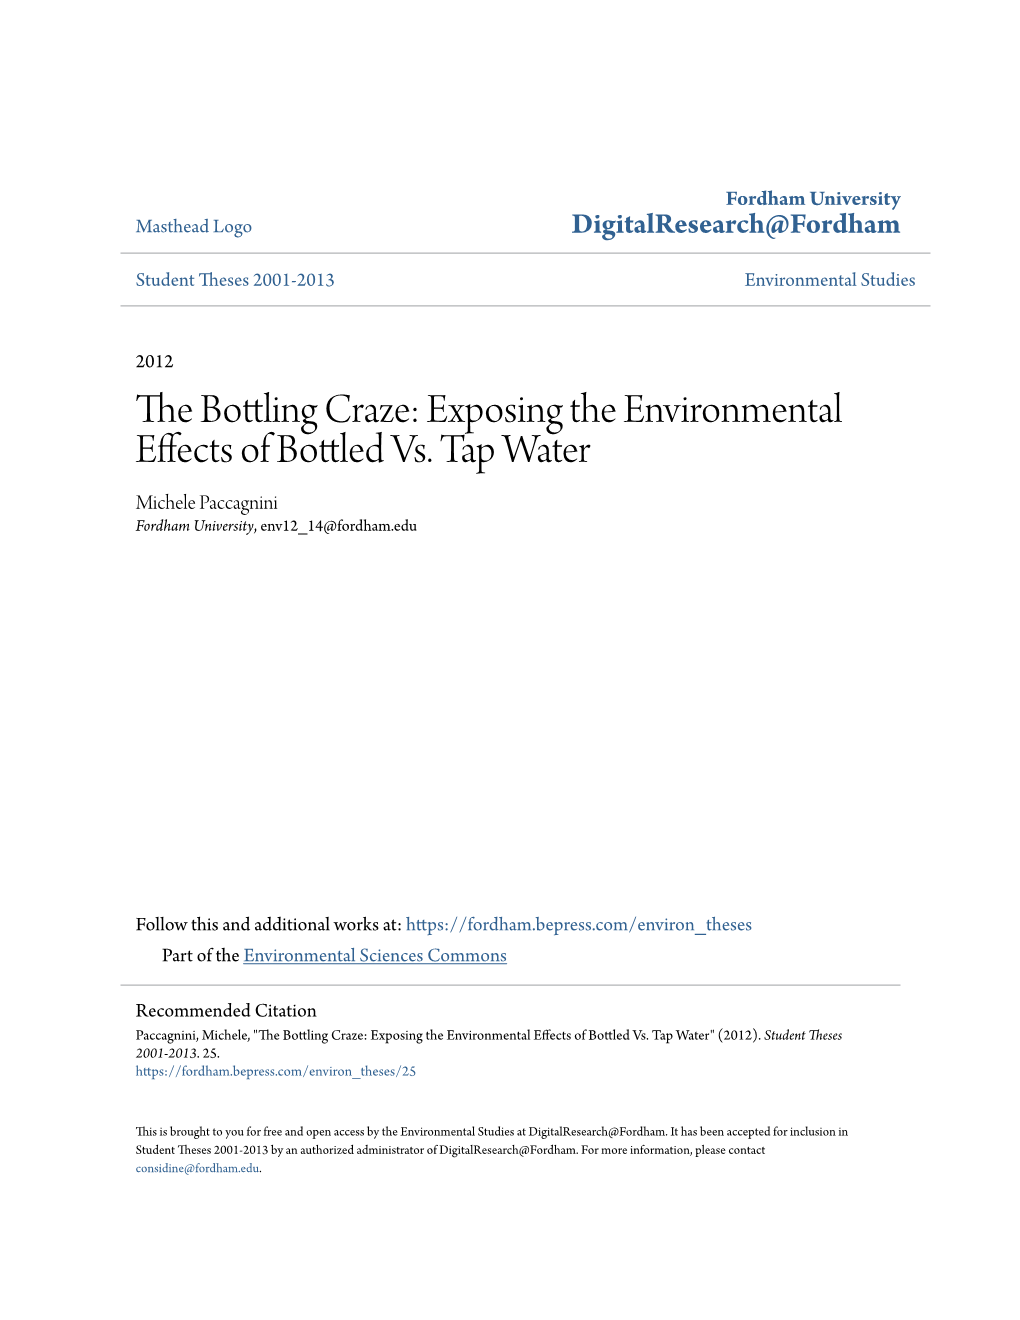 Exposing the Environmental Effects of Bottled Vs. Tap Water" (2012)